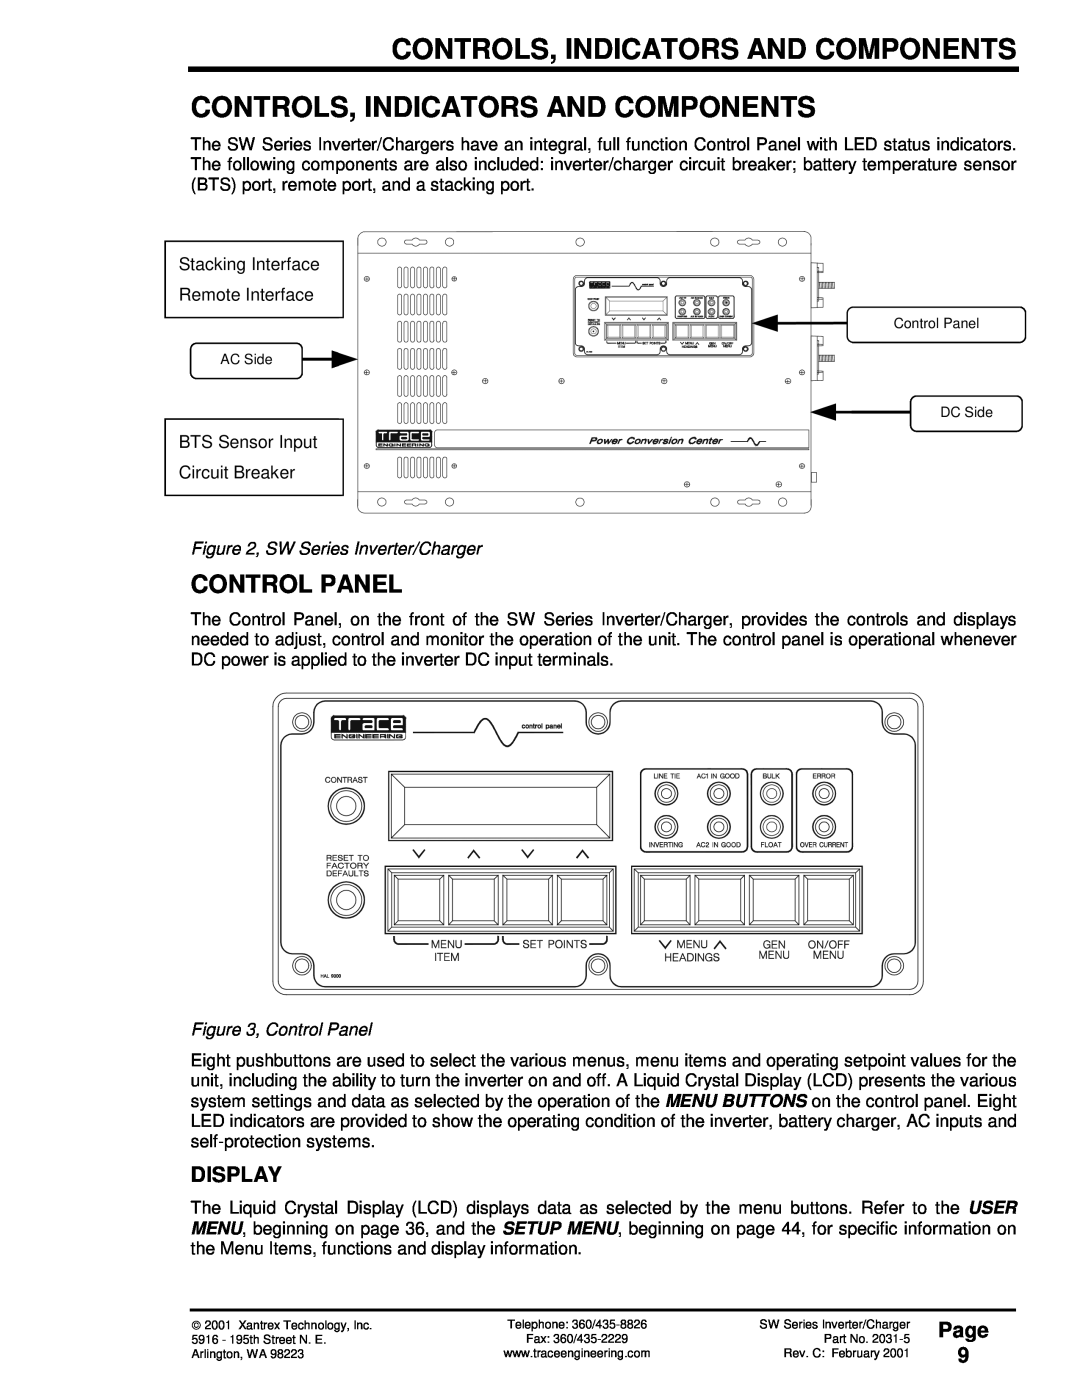 Xantrex Technology SW Series owner manual Controls, Indicators And Components, Control Panel, Display, Page 